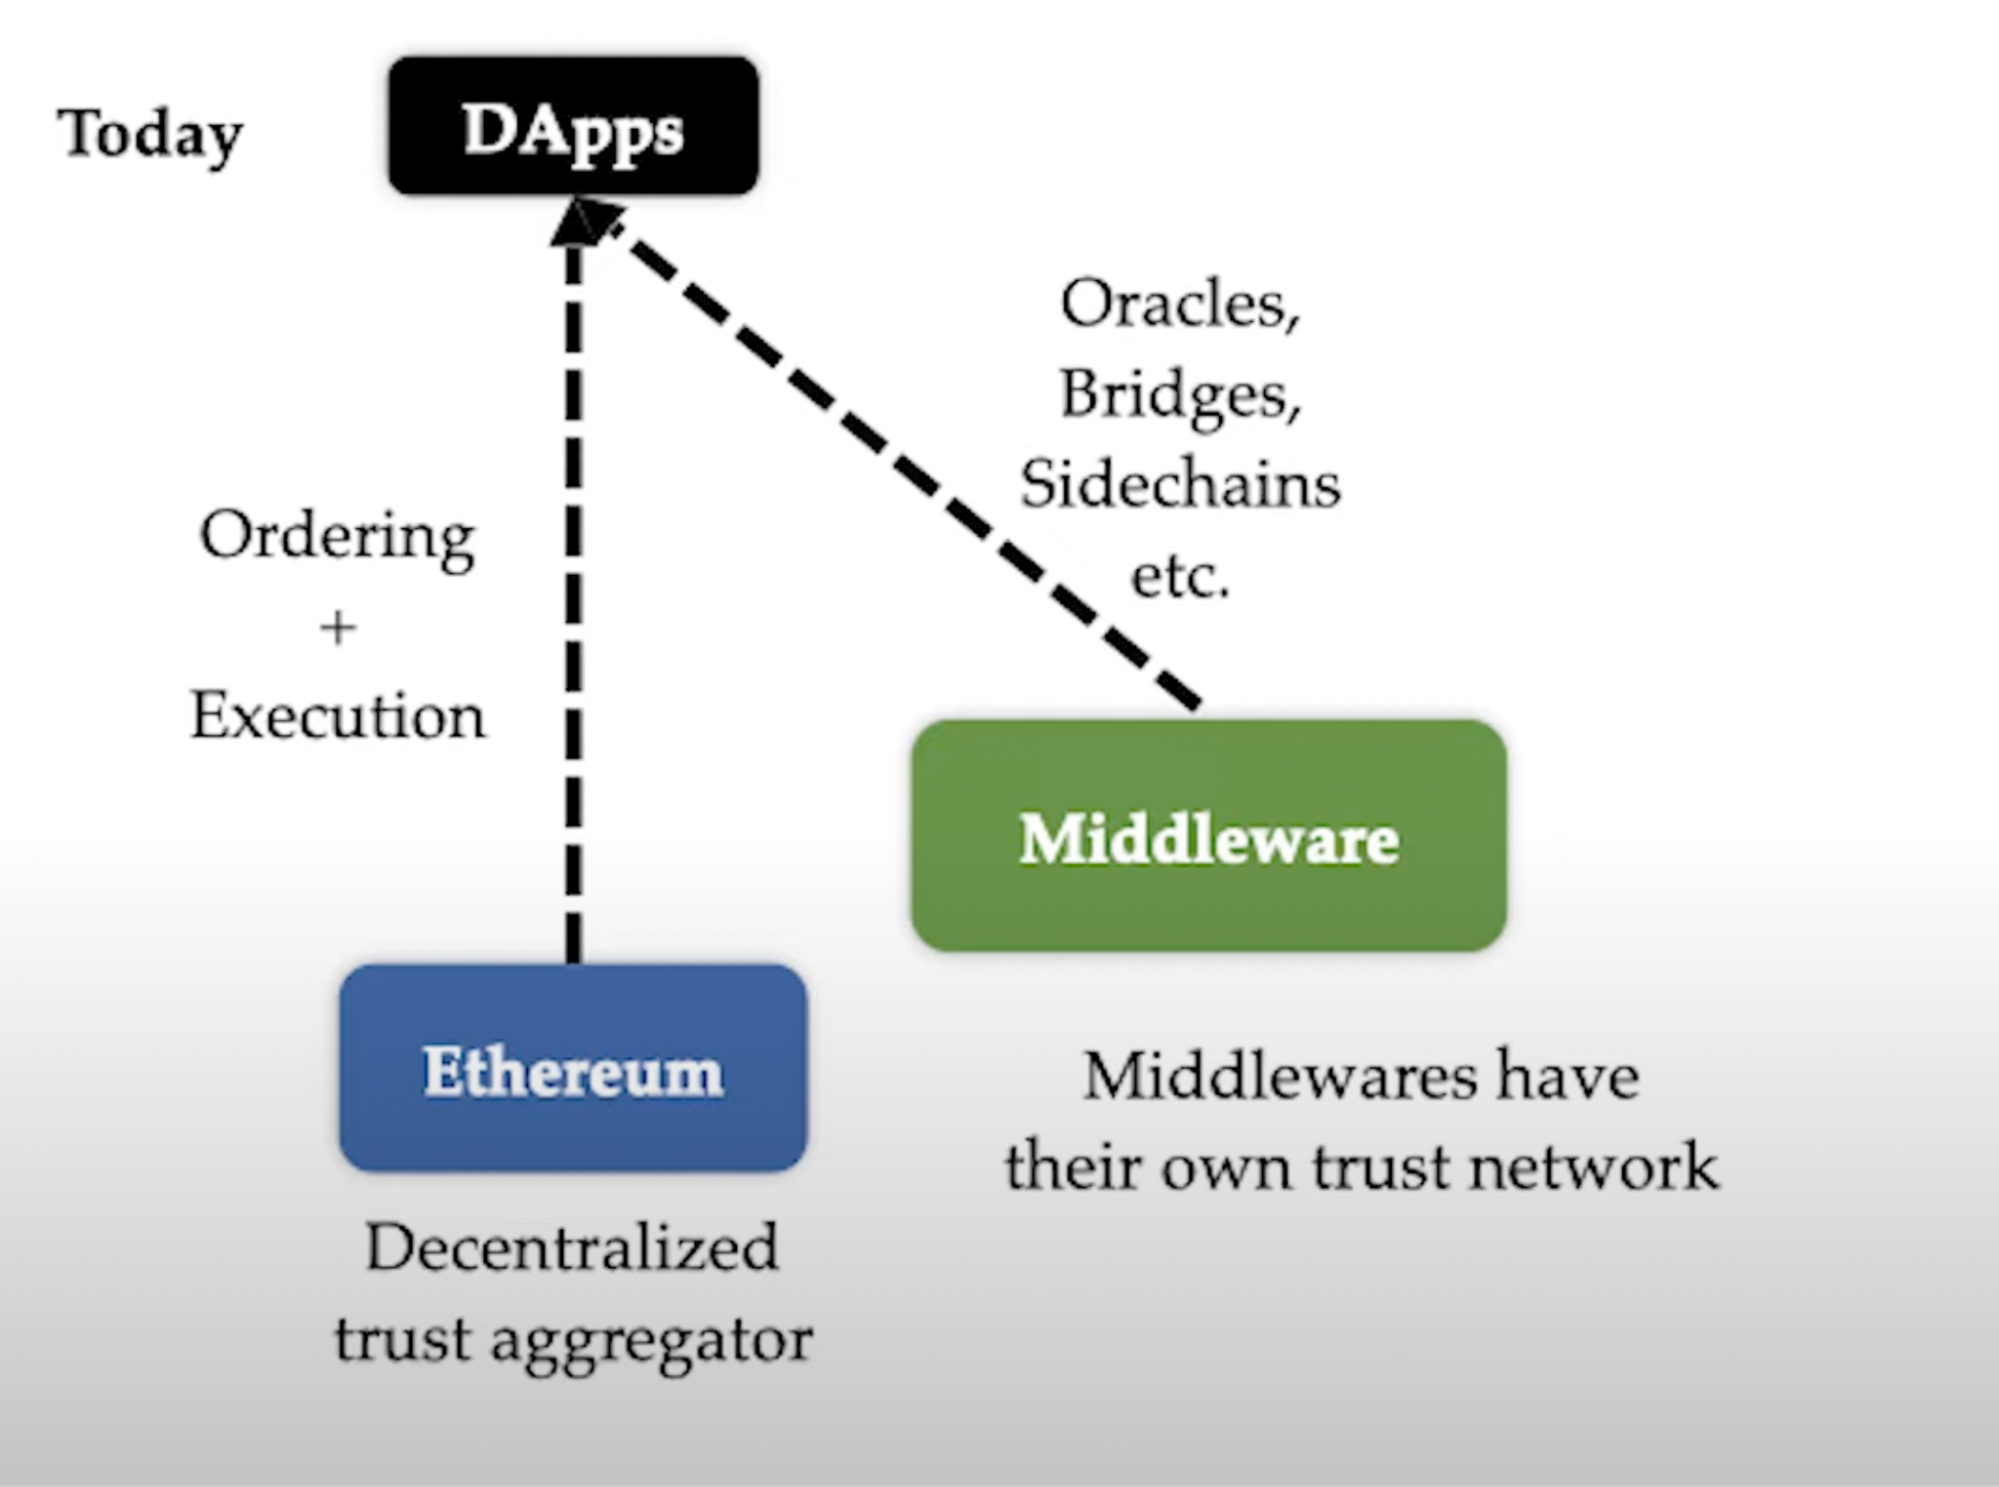 Dapp's reliance on other services